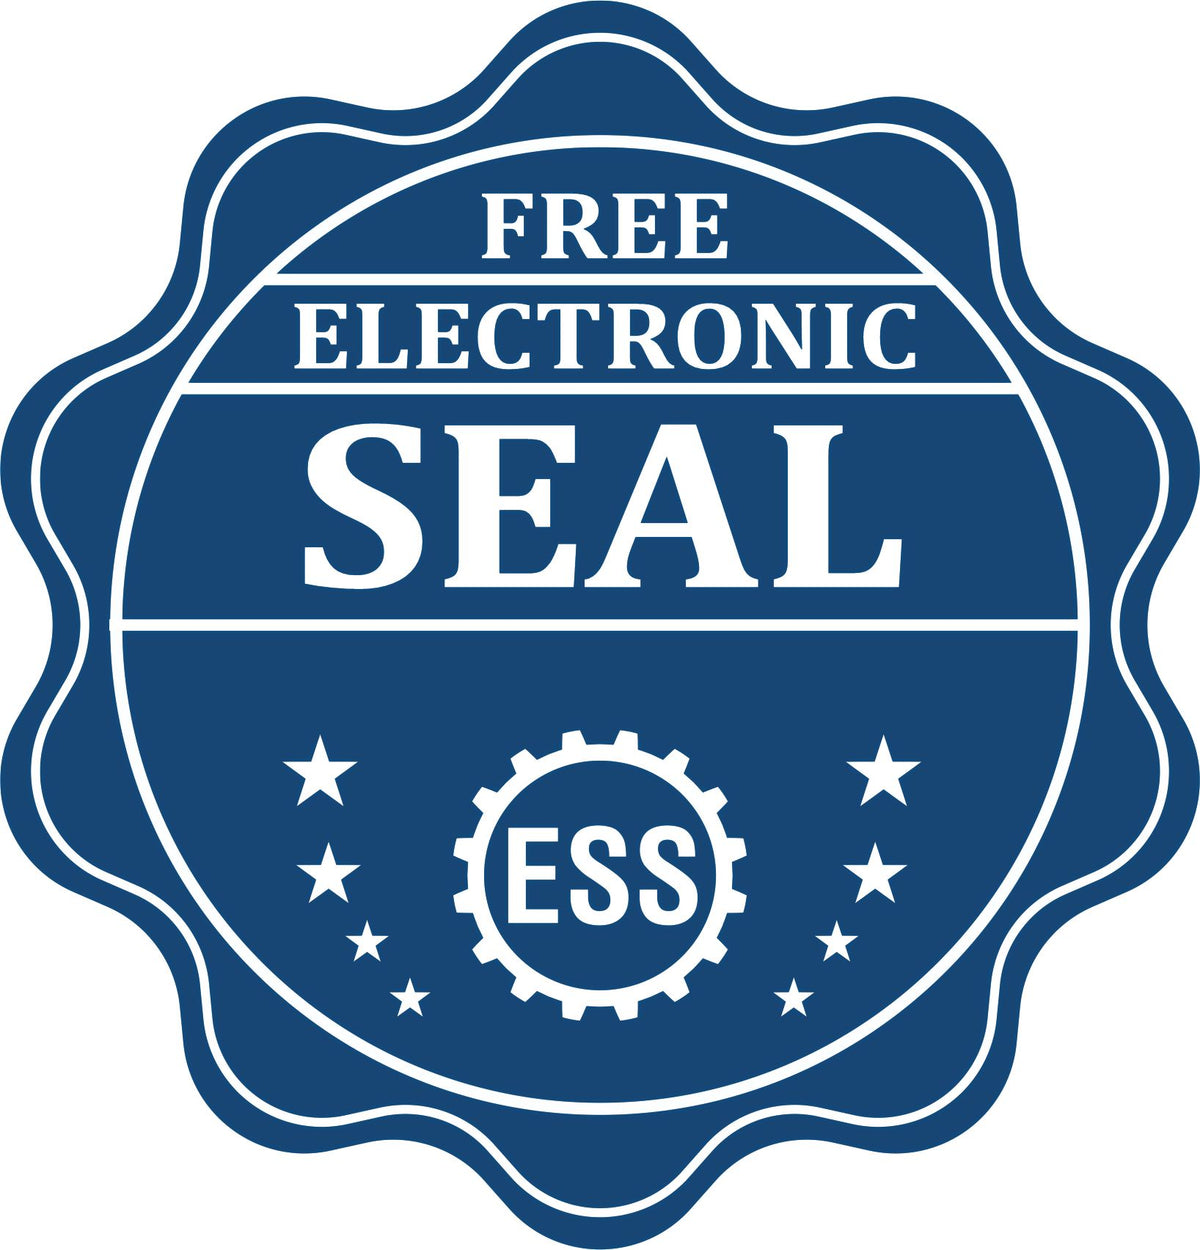 A badge showing a free electronic seal for the Premium MaxLight Pre-Inked Vermont Engineering Stamp with stars and the ESS gear on the emblem.